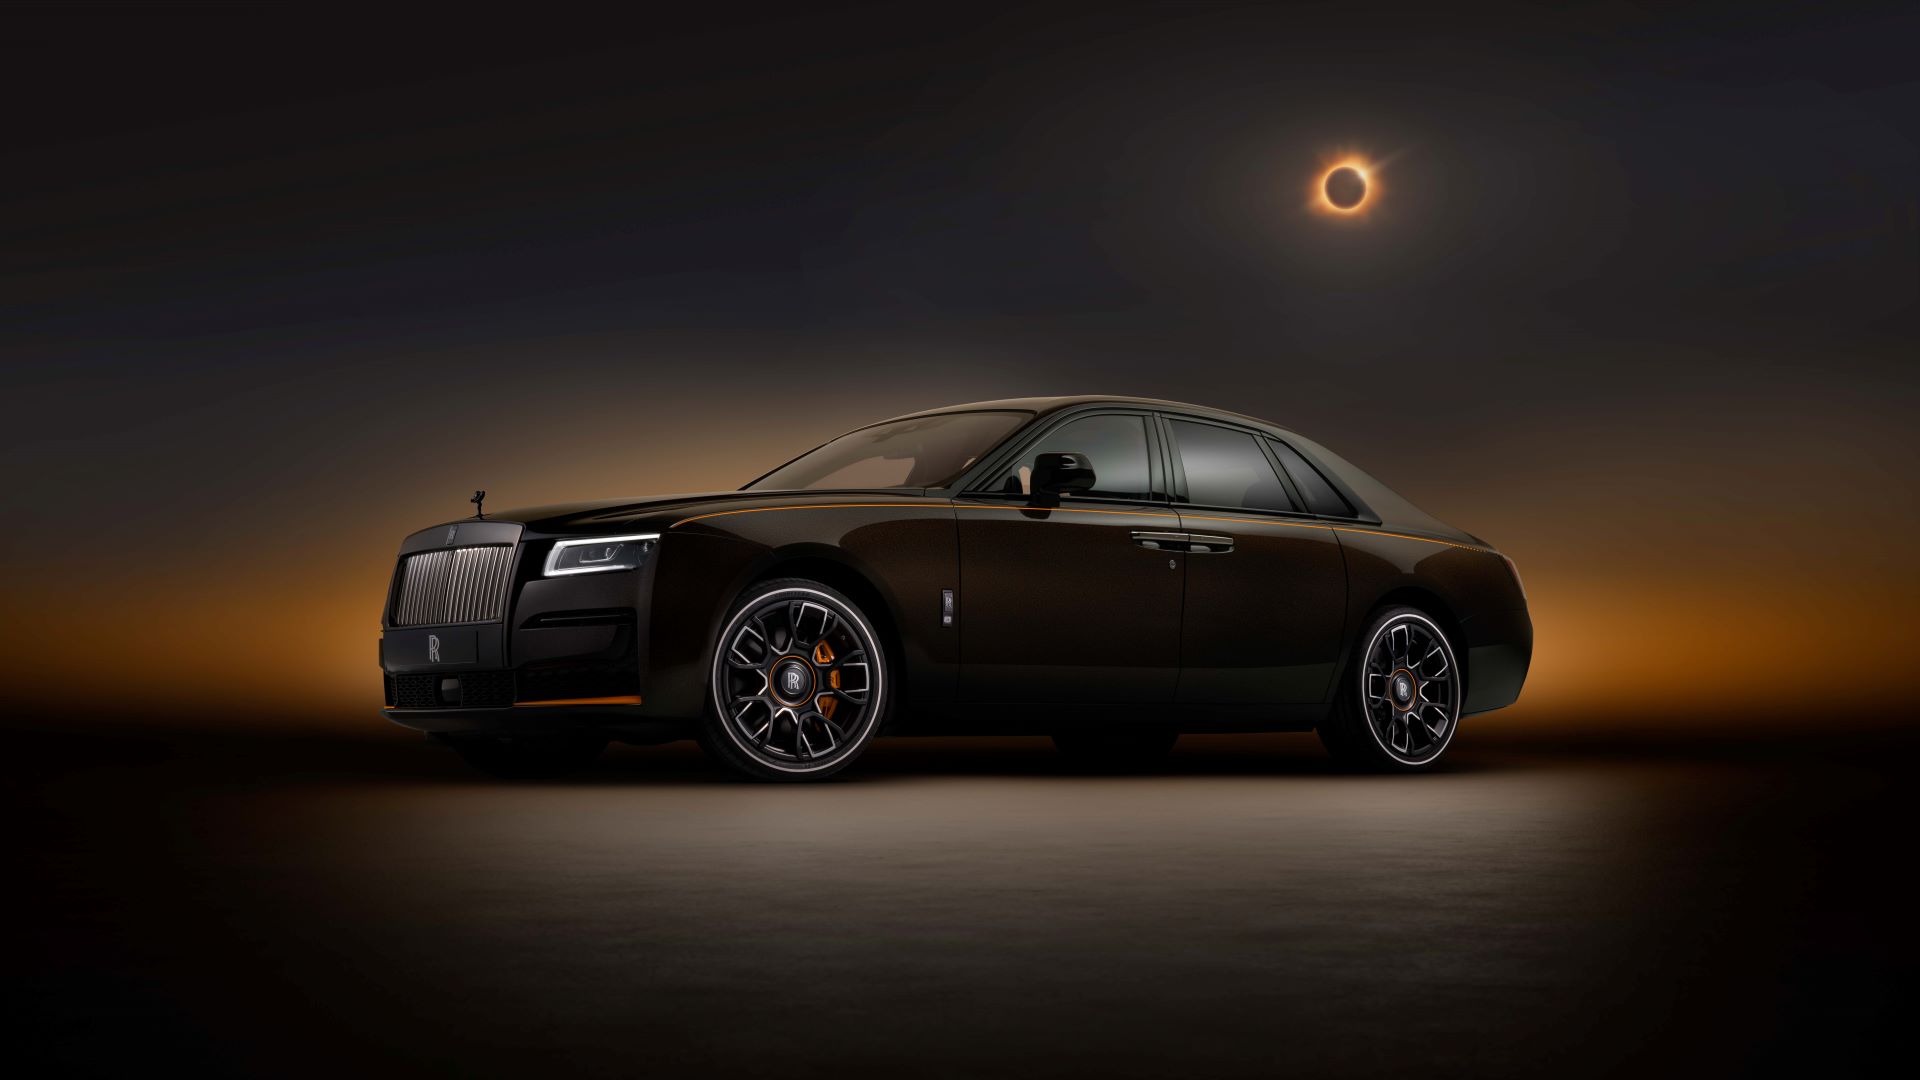 Rolls-Royce Black Badge Ghost Ékleipsis Private Collection: An expression of spellbinding beauty